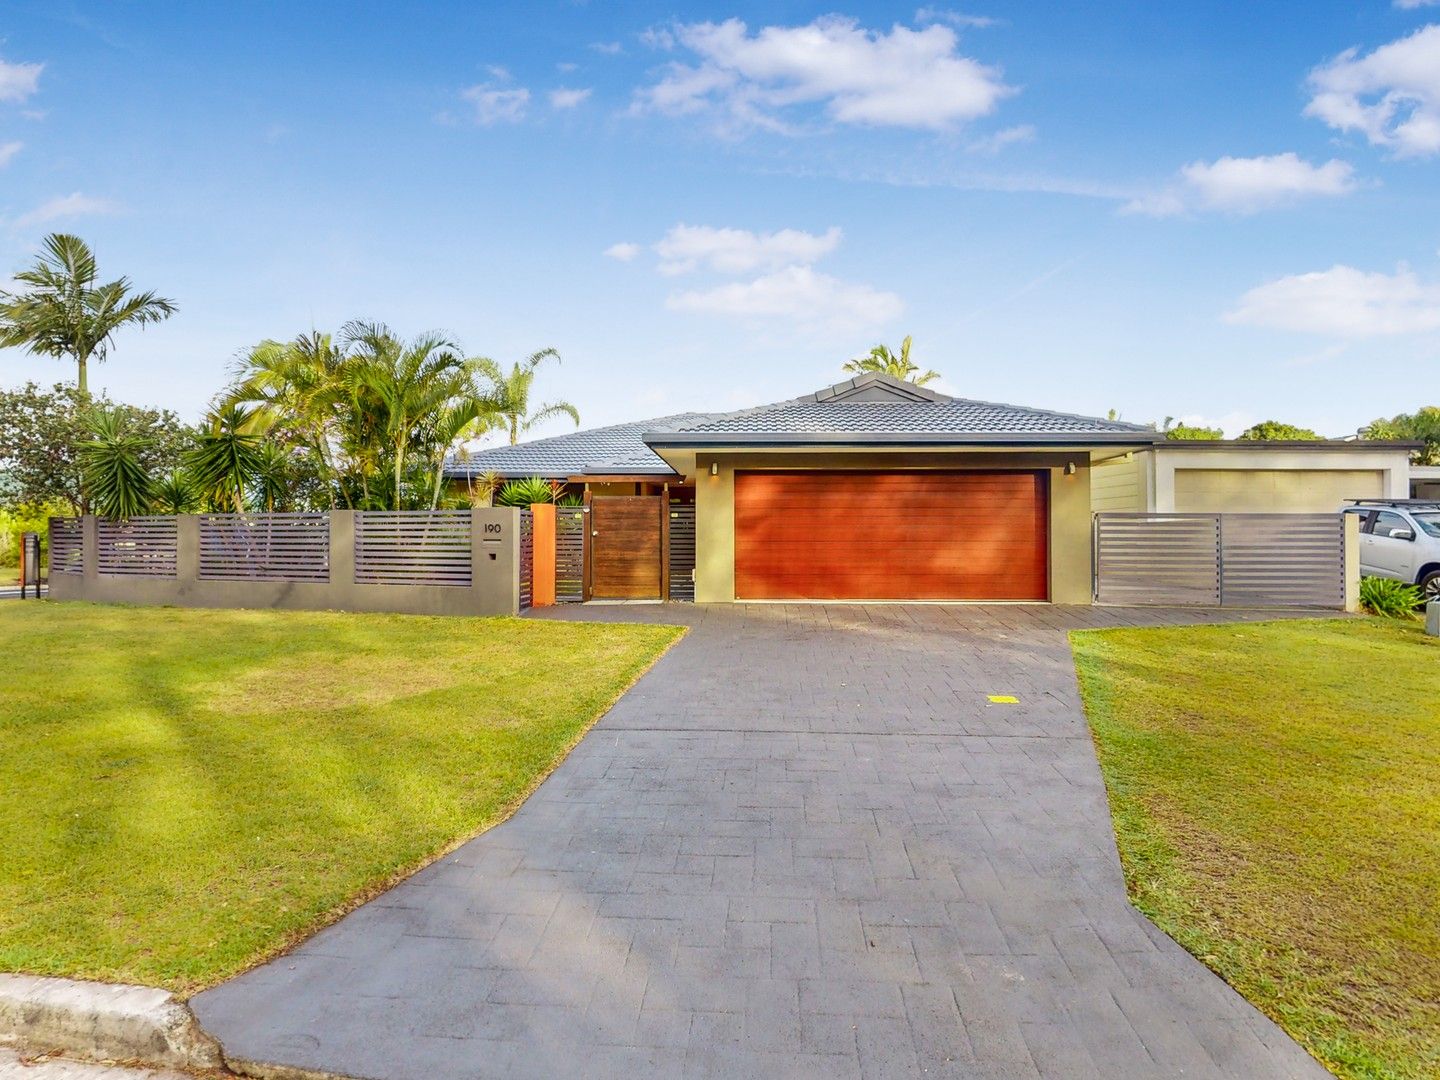 4 bedrooms House in 190 Tallebudgera Drive PALM BEACH QLD, 4221